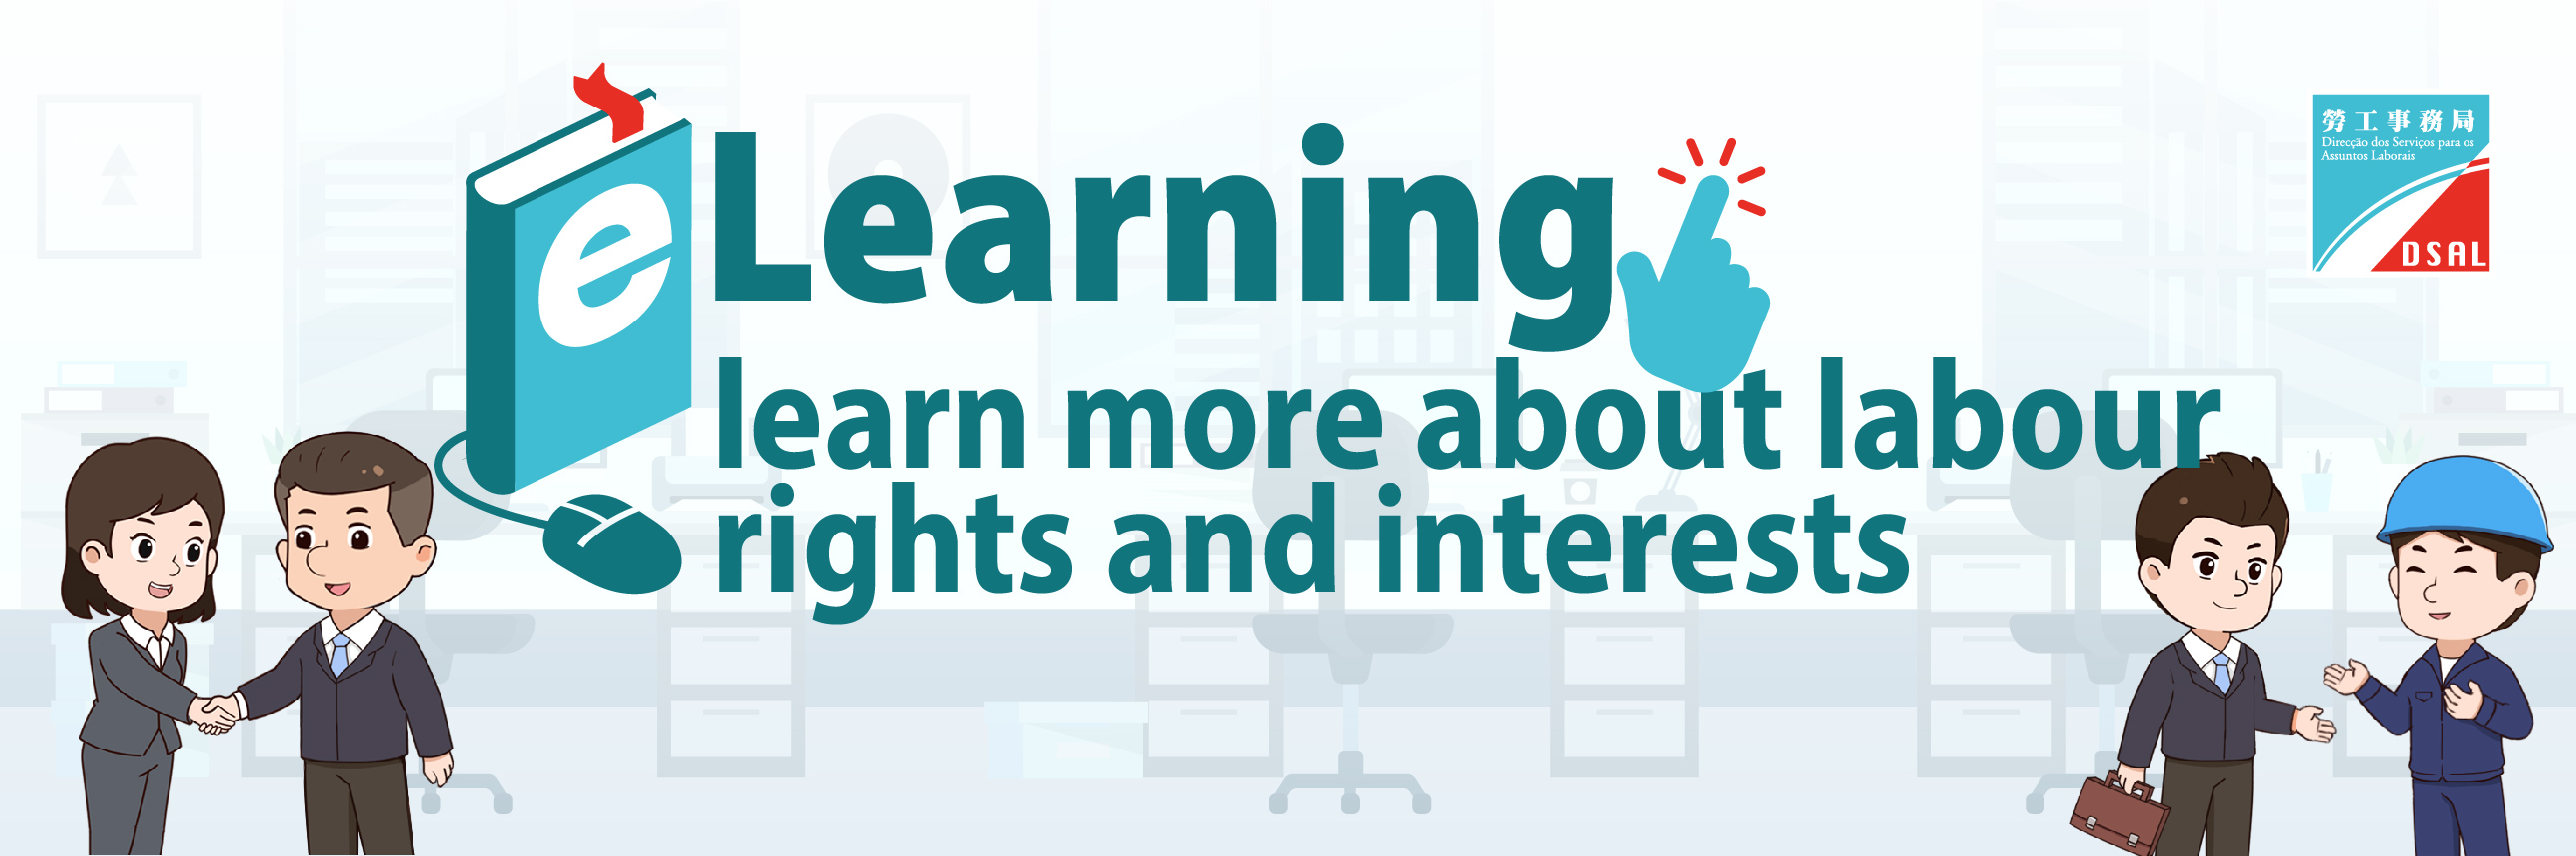 eLearning learn more about labour rights and interests